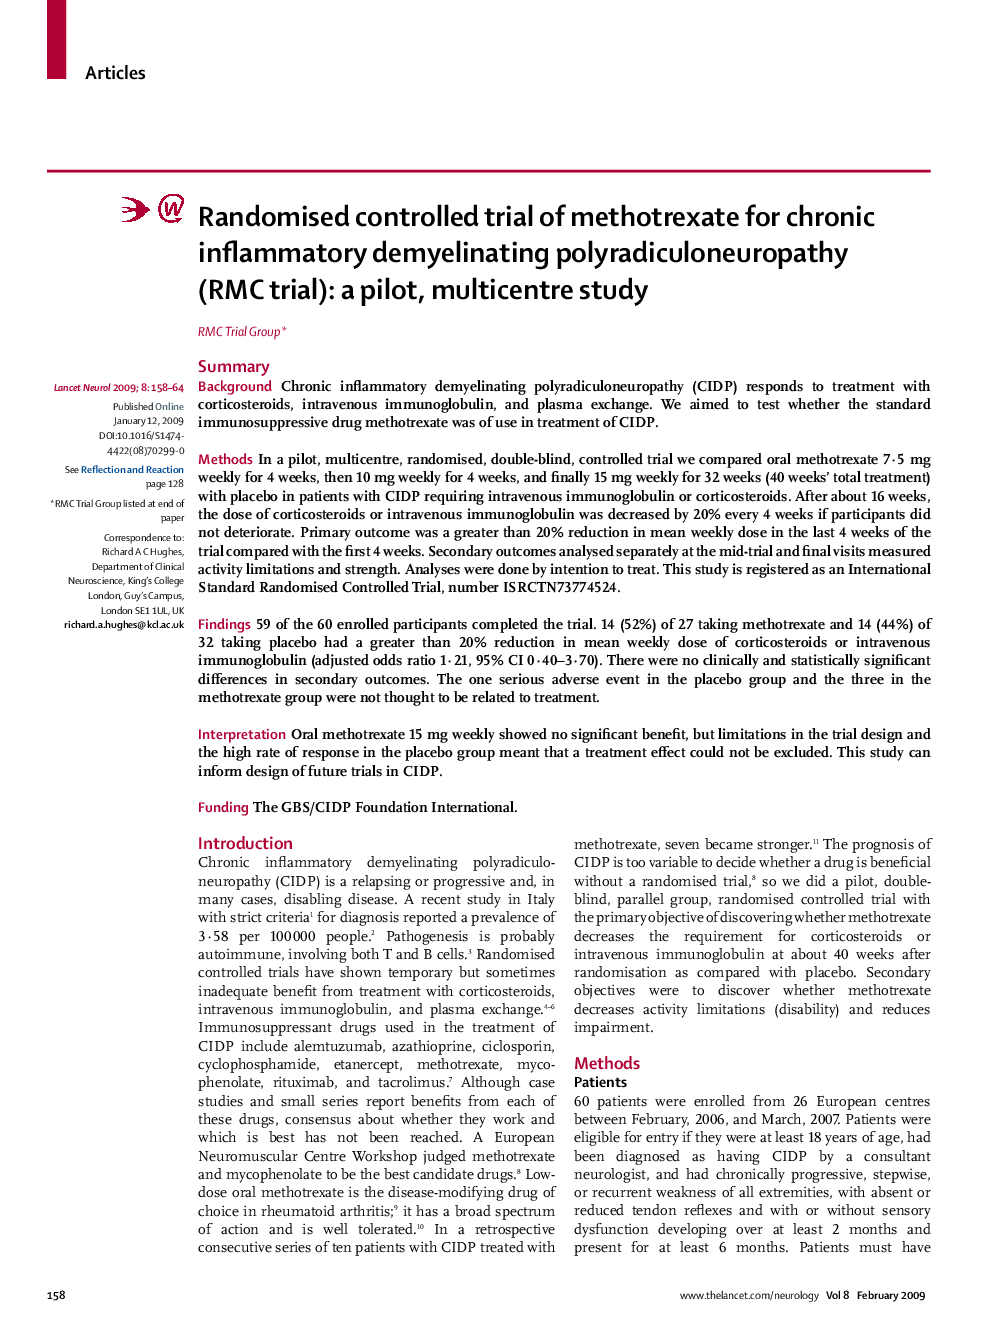 Randomised controlled trial of methotrexate for chronic inflammatory demyelinating polyradiculoneuropathy (RMC trial): a pilot, multicentre study